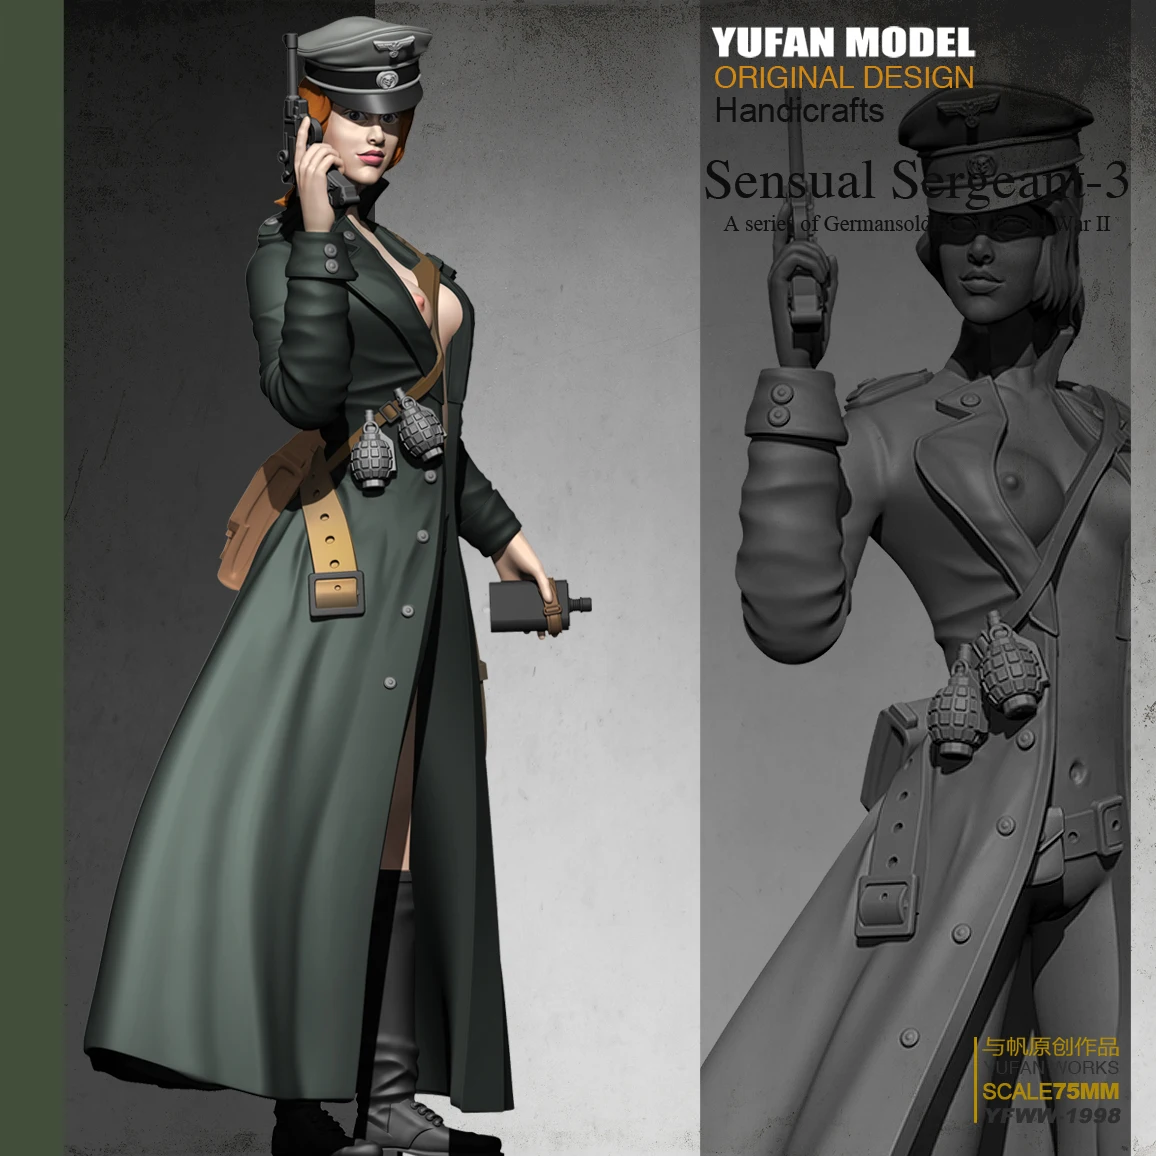 Details about   YUFAN MODEL 1/24 Resin Kits X Detective Resin Soldier self-assembled TD-2078 